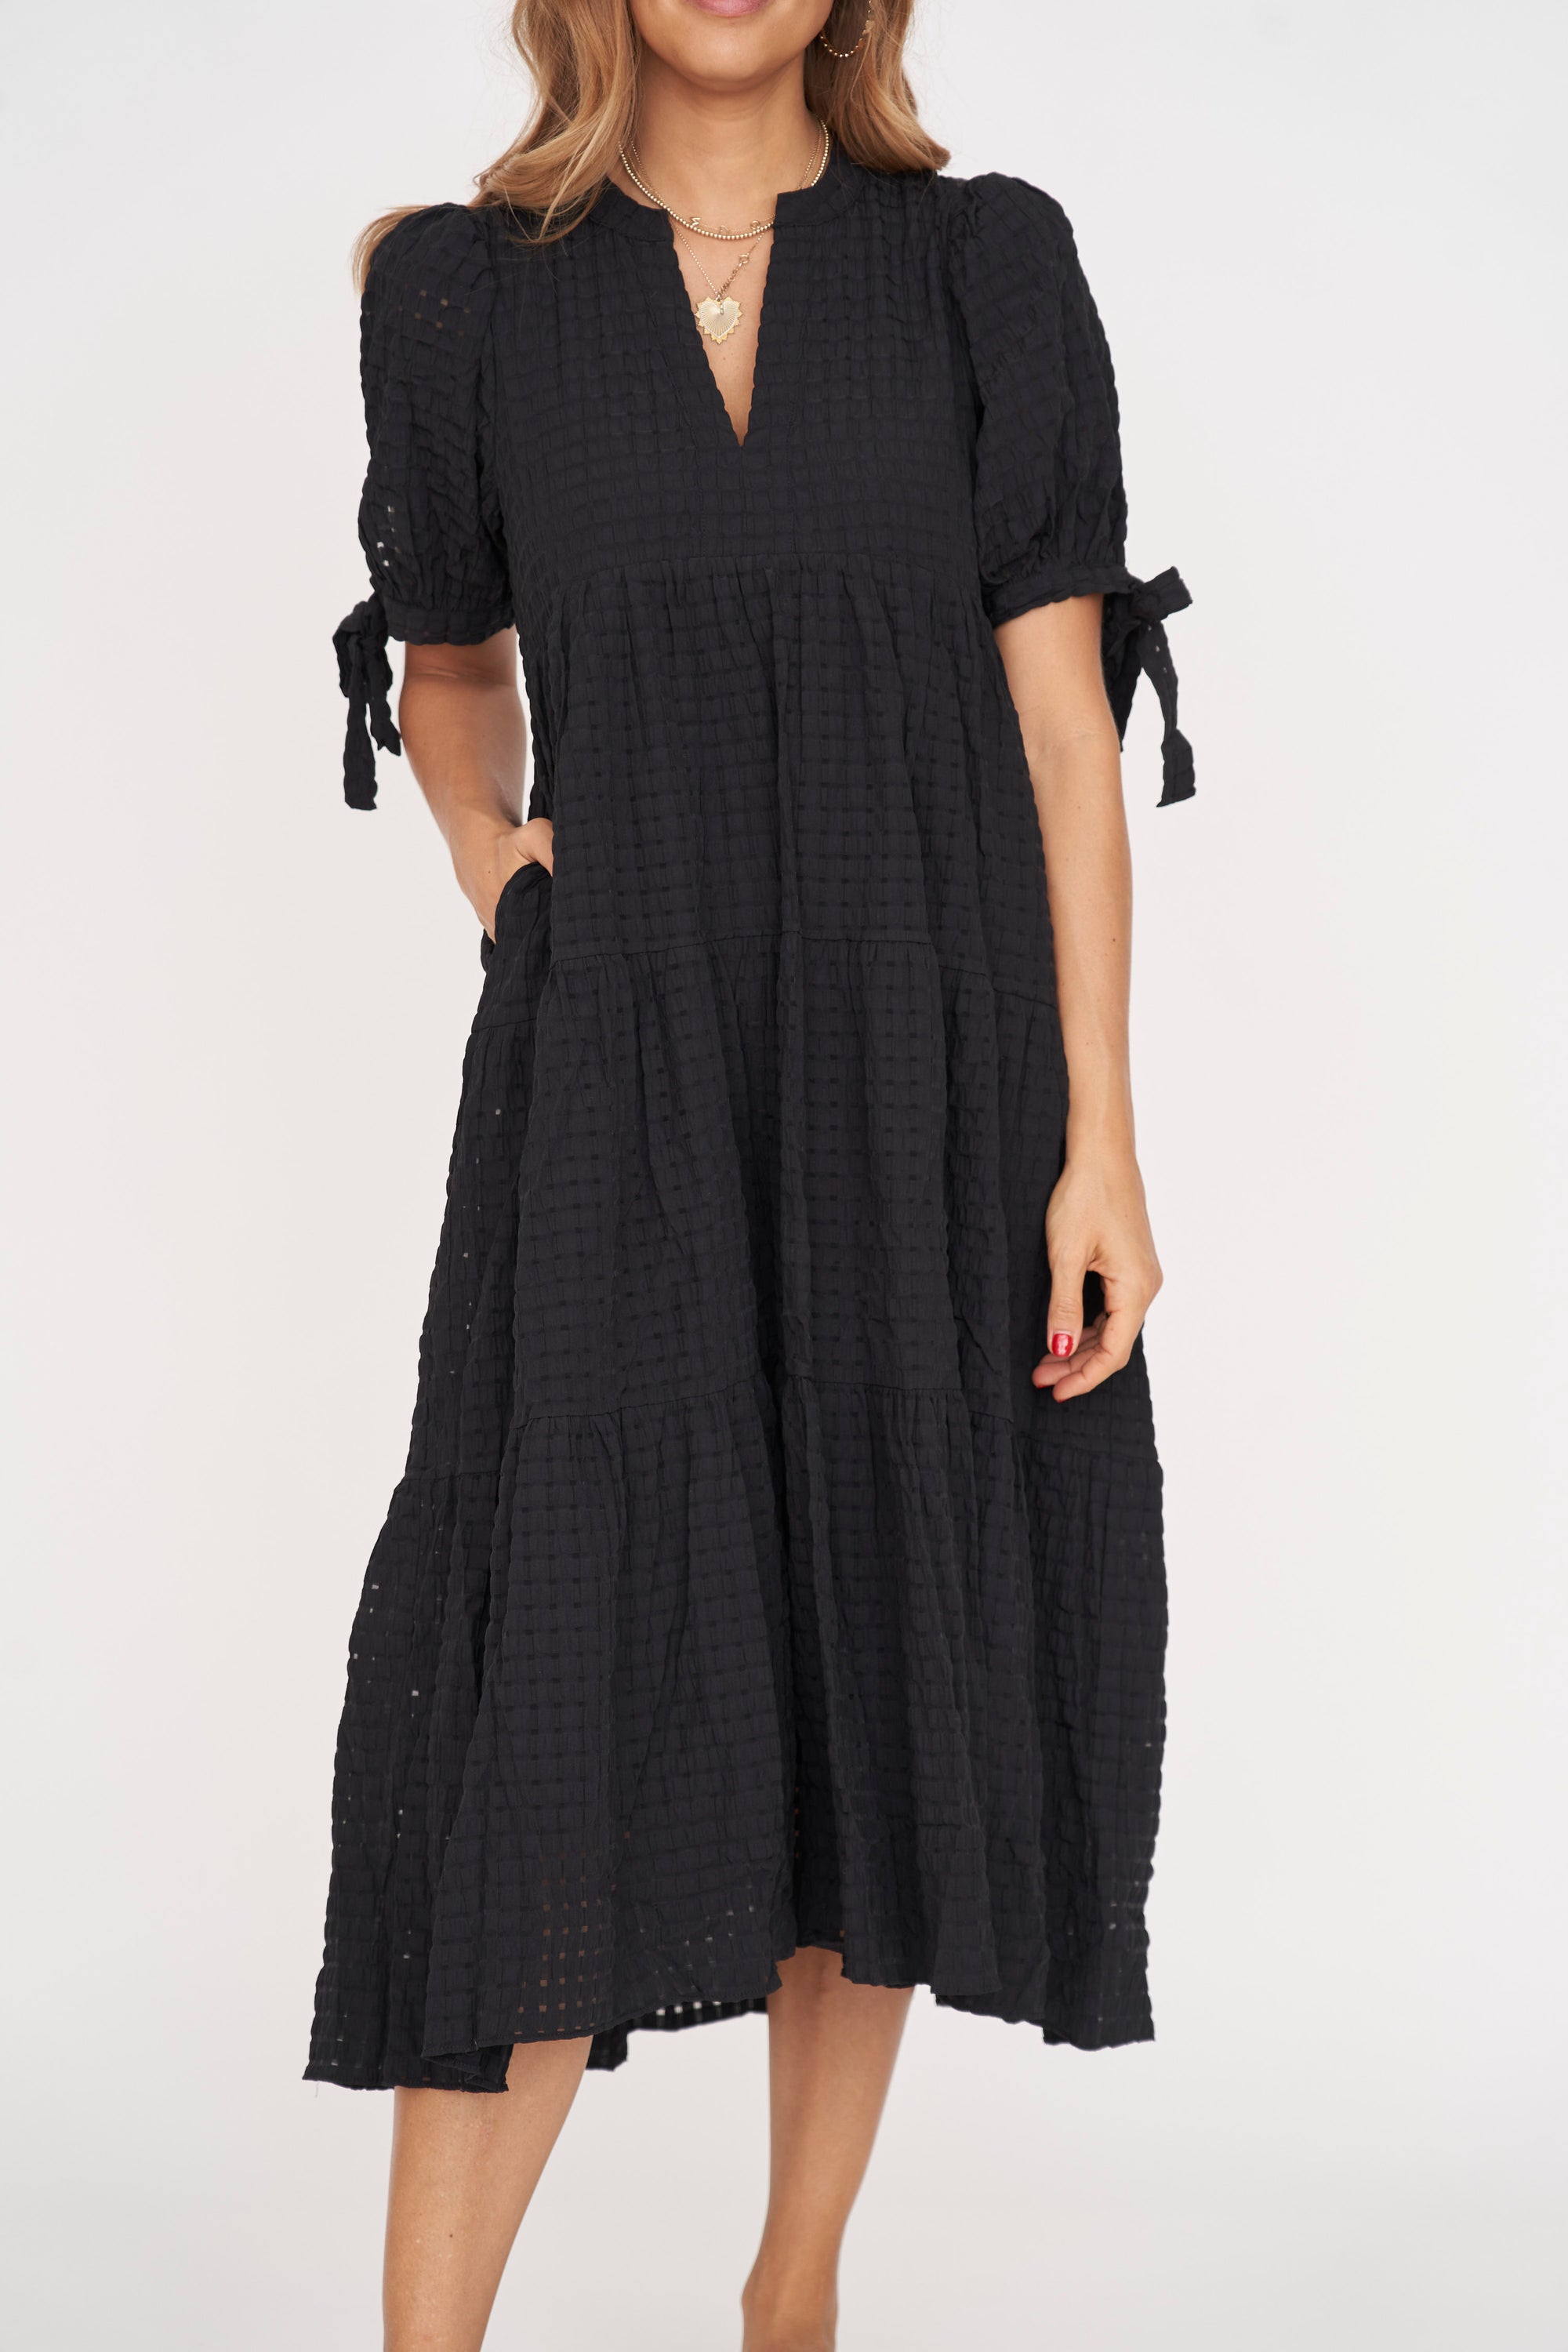 Gingham Tiered Dress with Bow-Tie Sleeves in Black